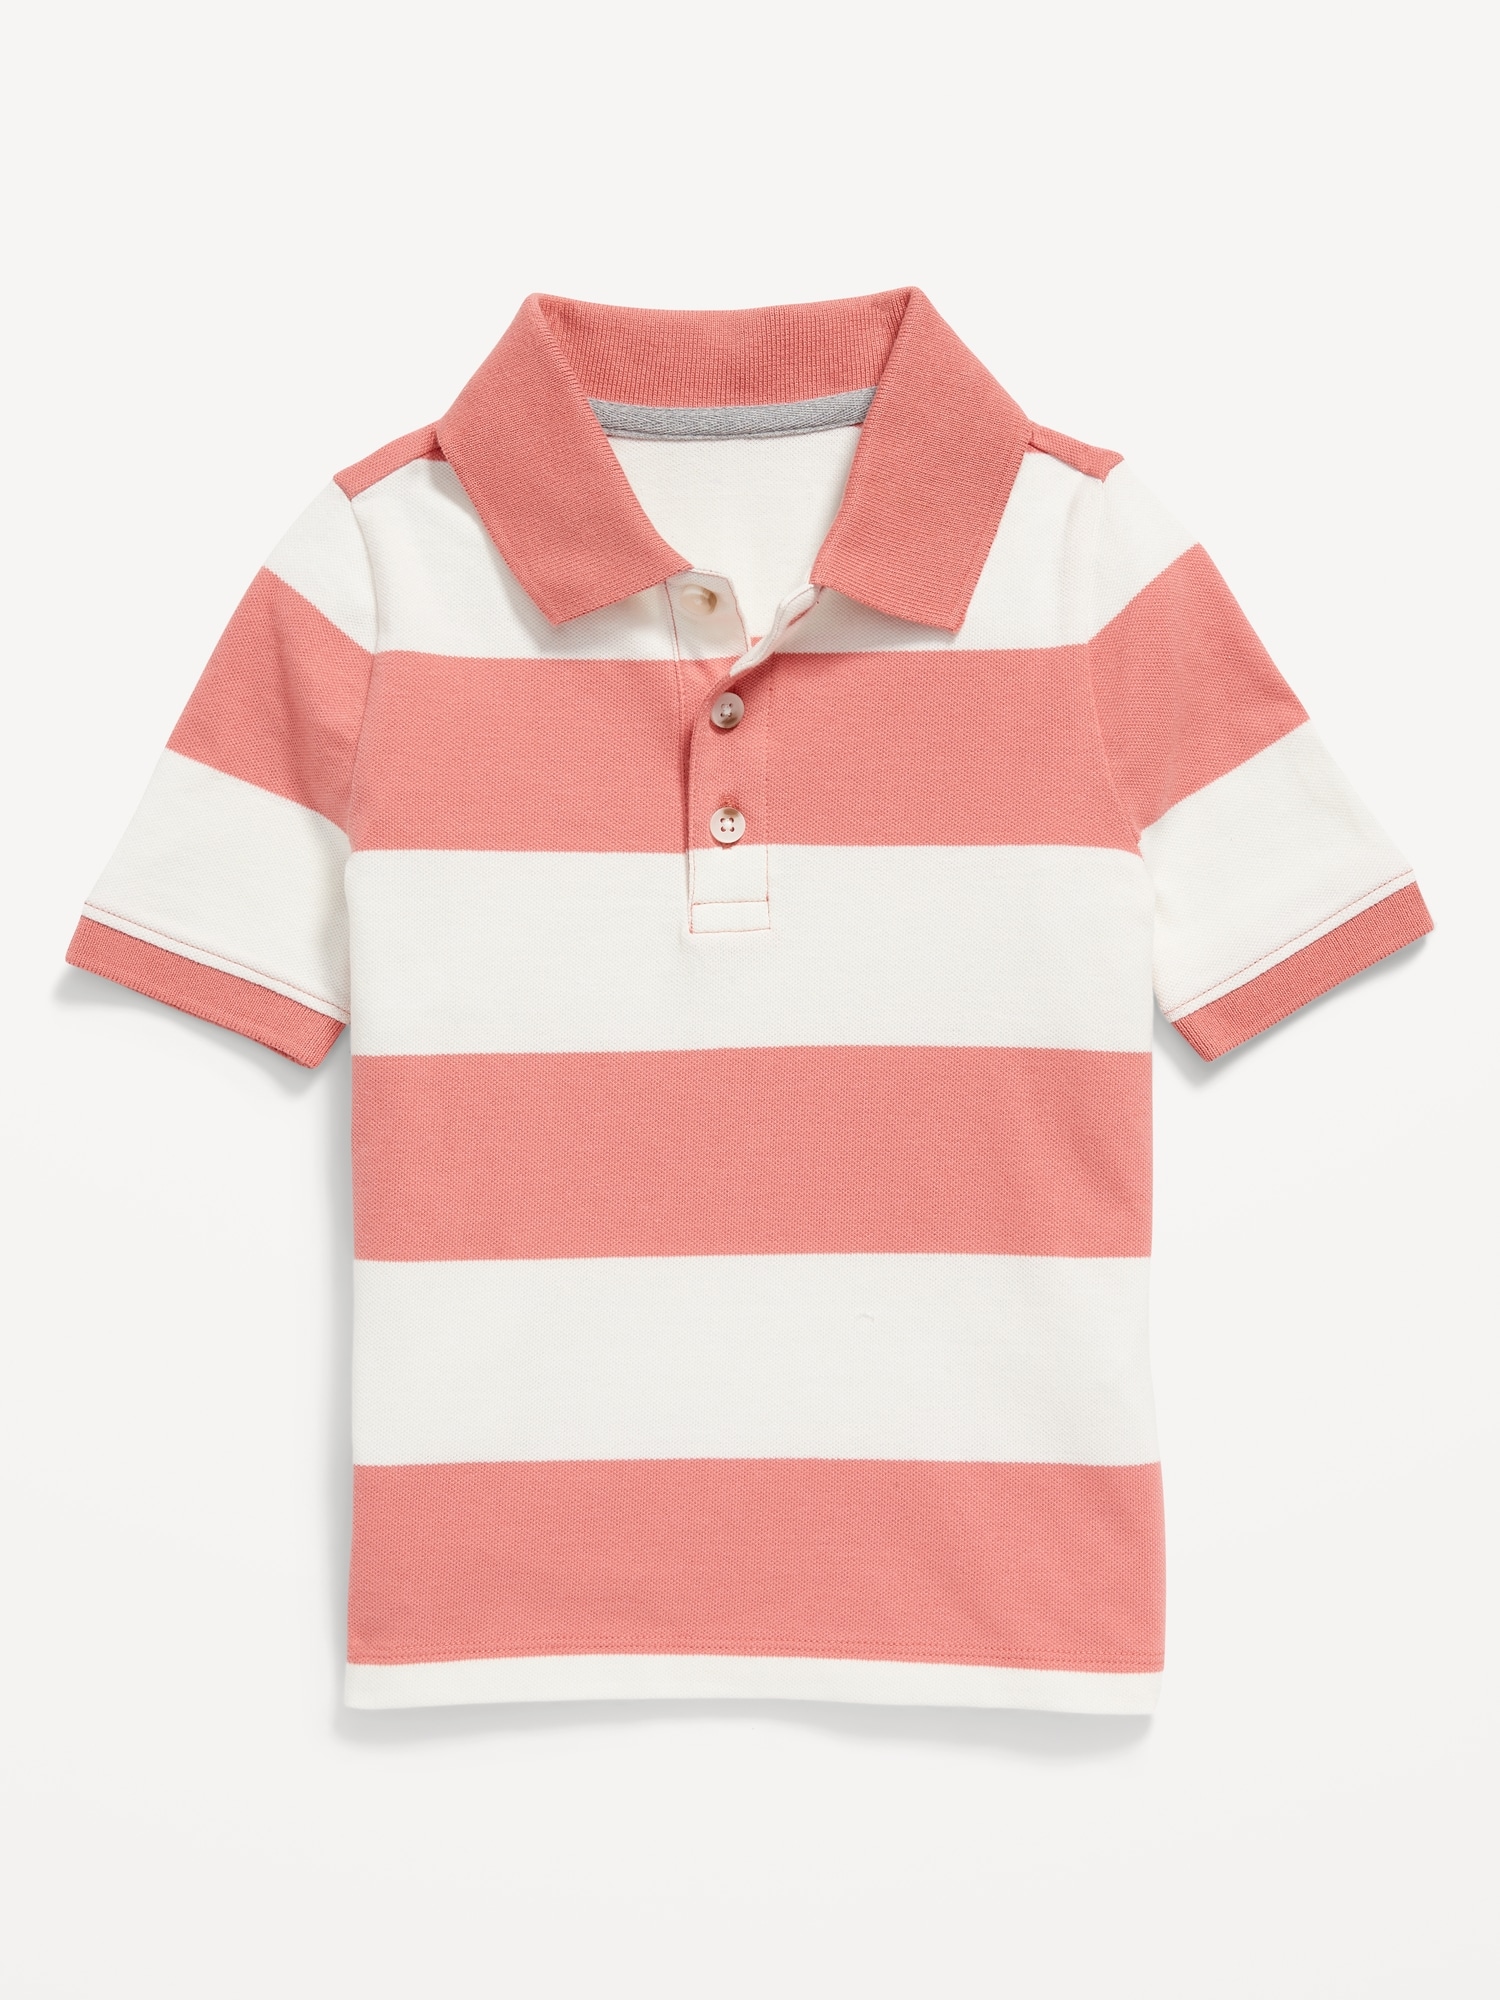 Old Navy Printed Polo Shirt for Toddler Boys pink. 1